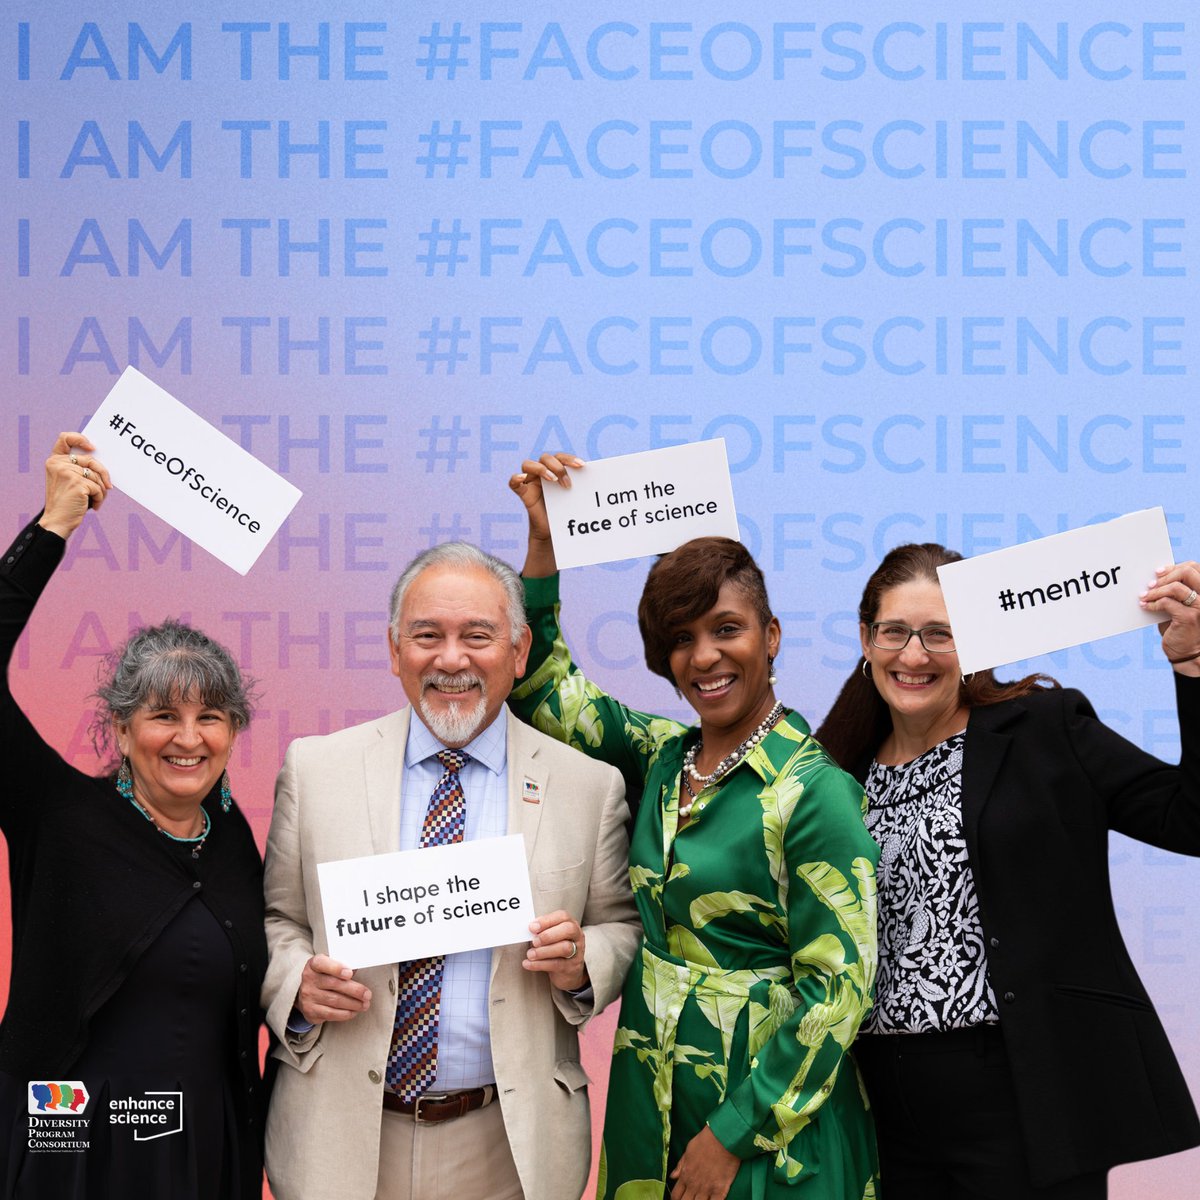 Members of the National Research Mentoring Network represent the #FaceOfScience! @NRMNet enhances mentorship across the country. @nihdpc